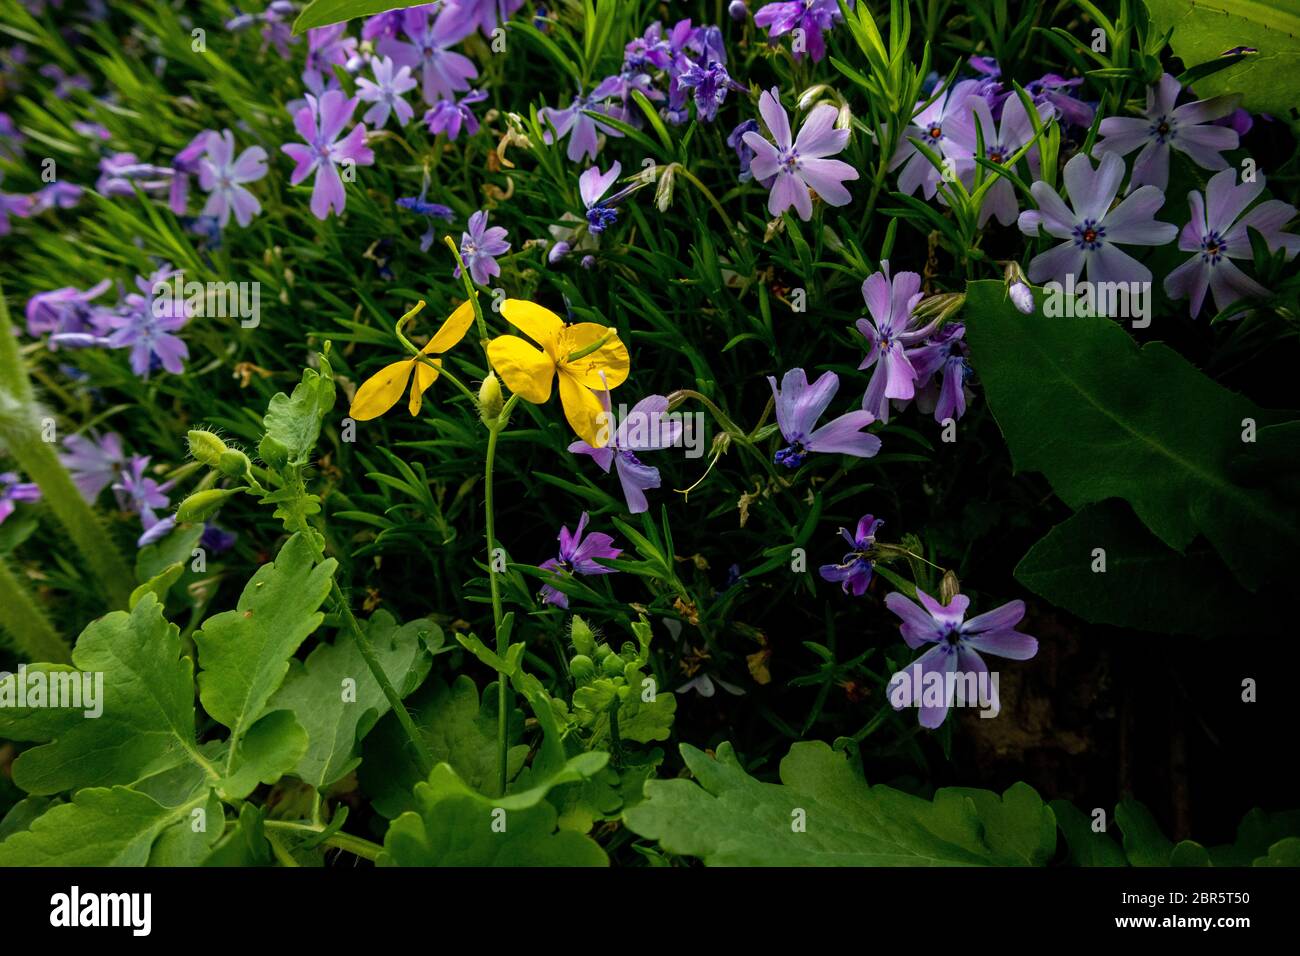 Phlox subulata, also known as the moss phlox. Blue flowers. Stock Photo